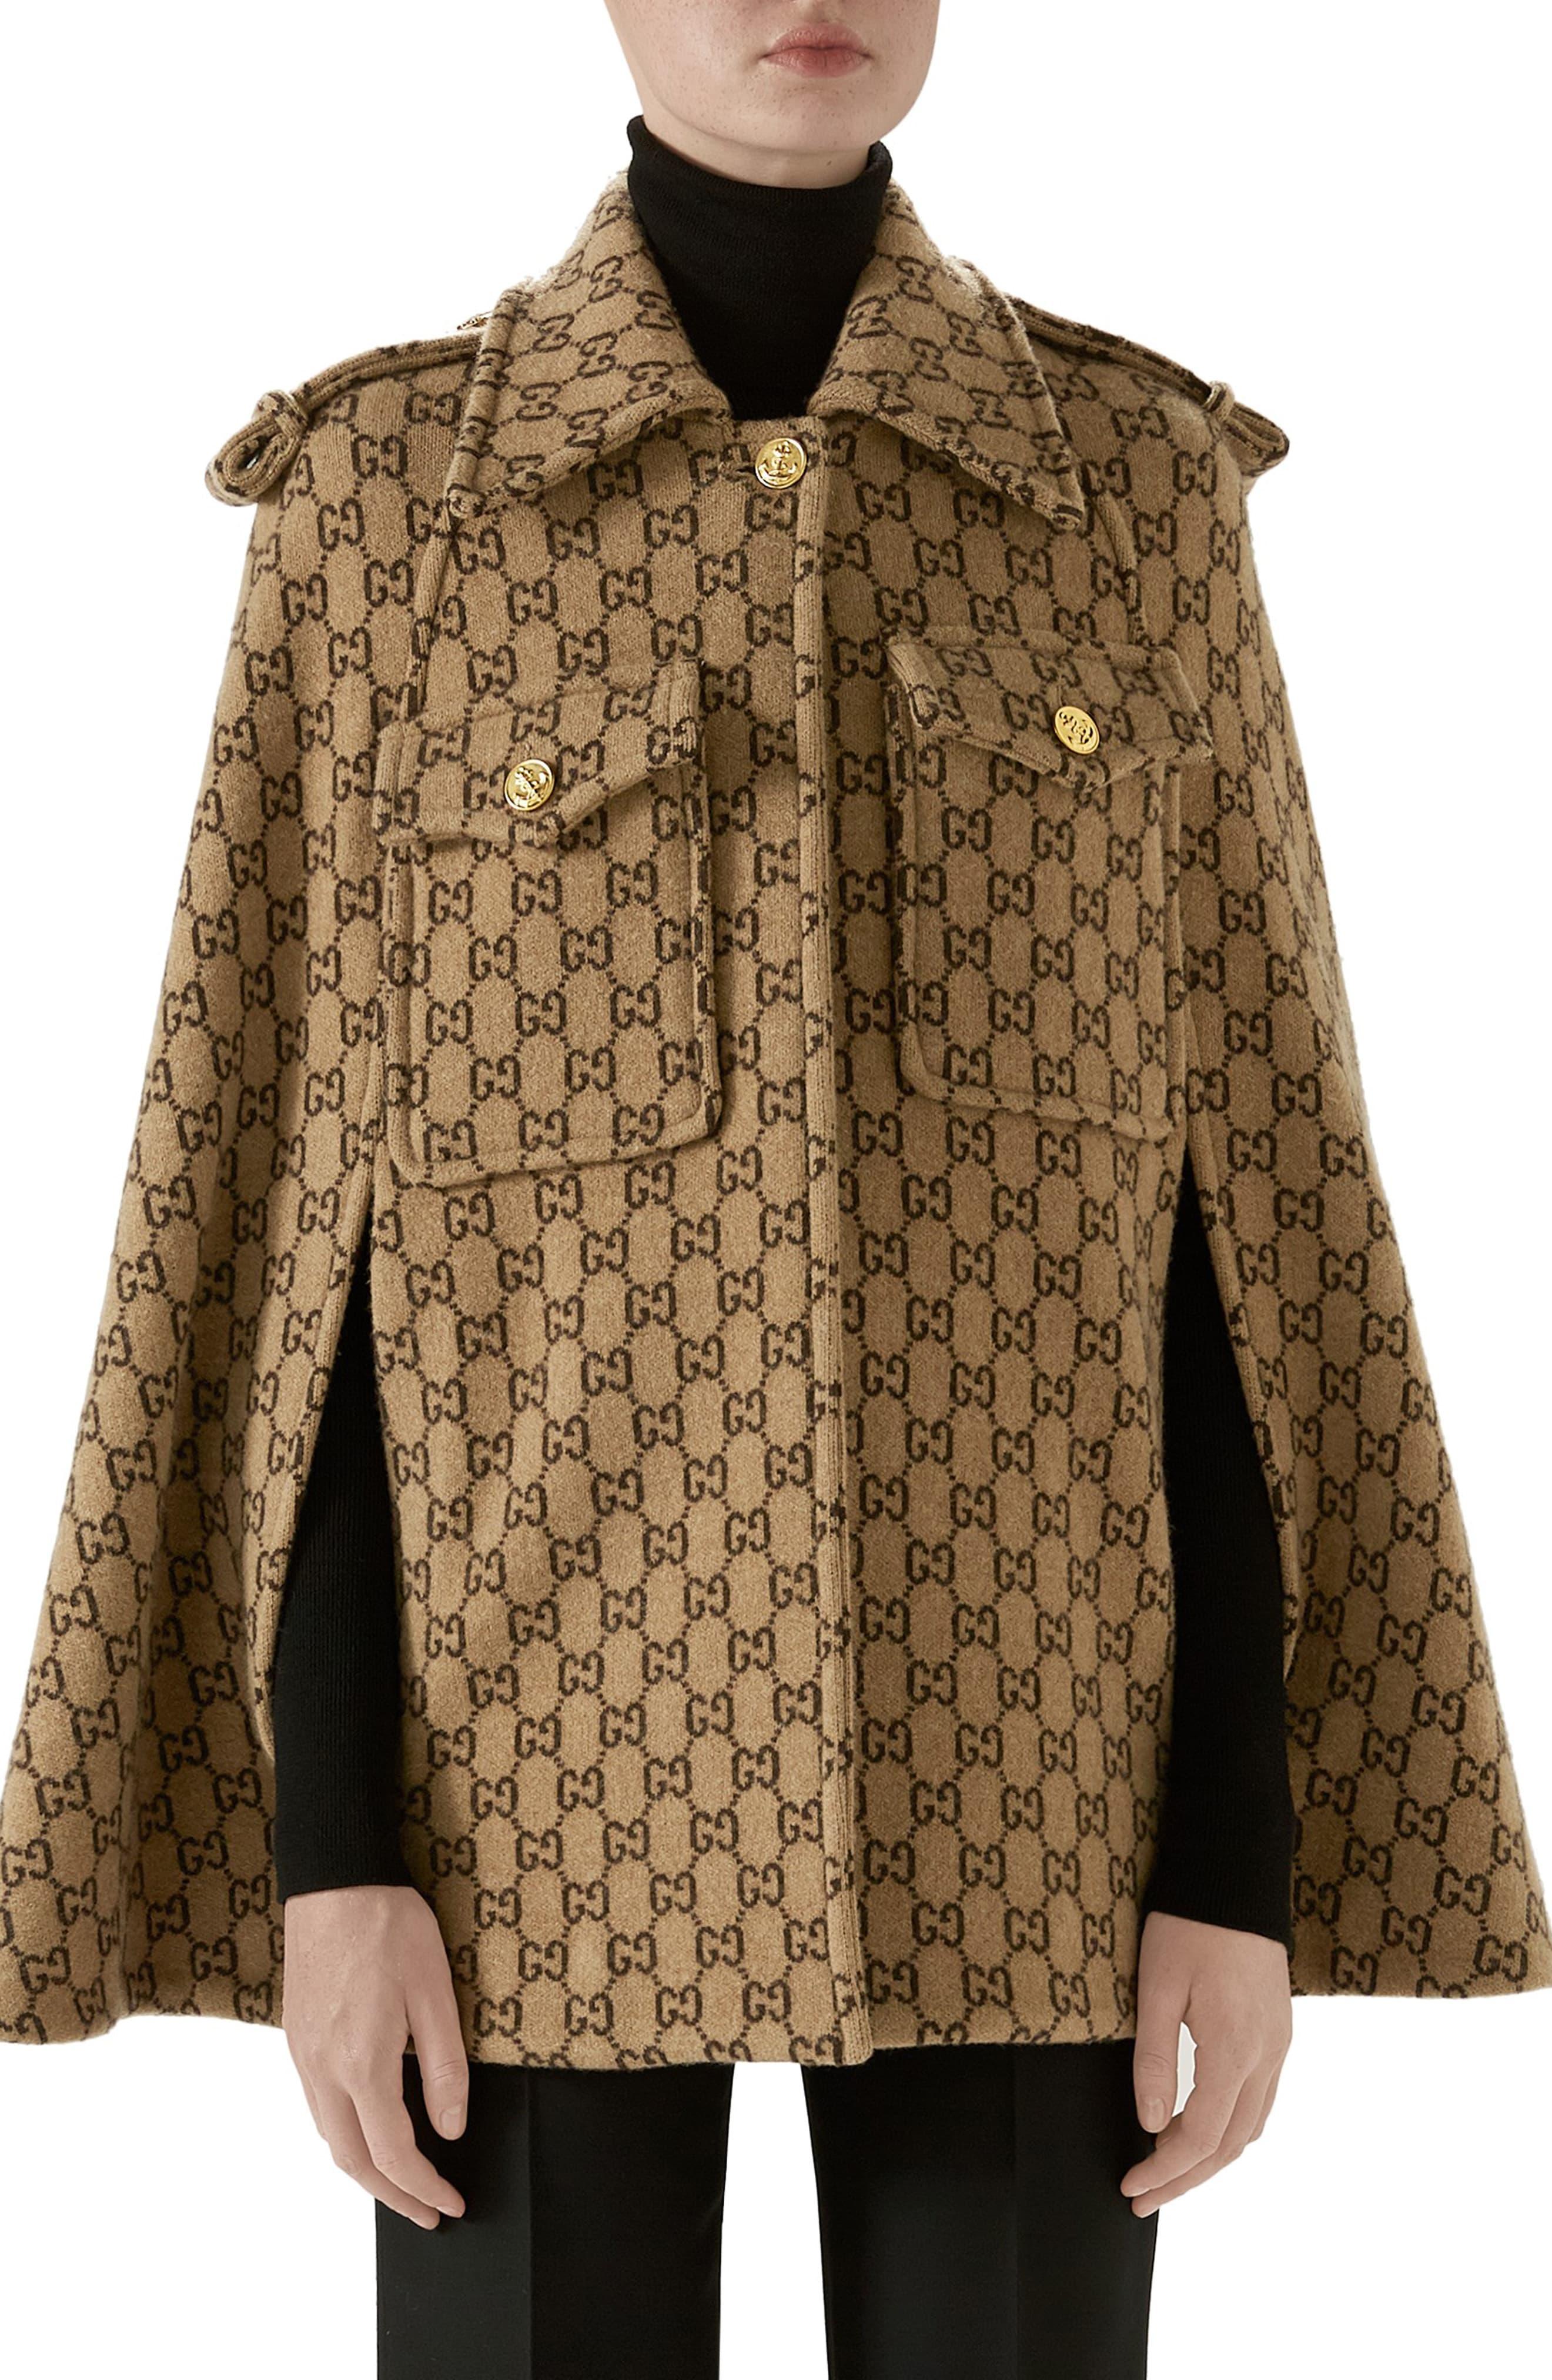 Gucci Double G Monogram Wool Cape in Beige (Natural) - Lyst